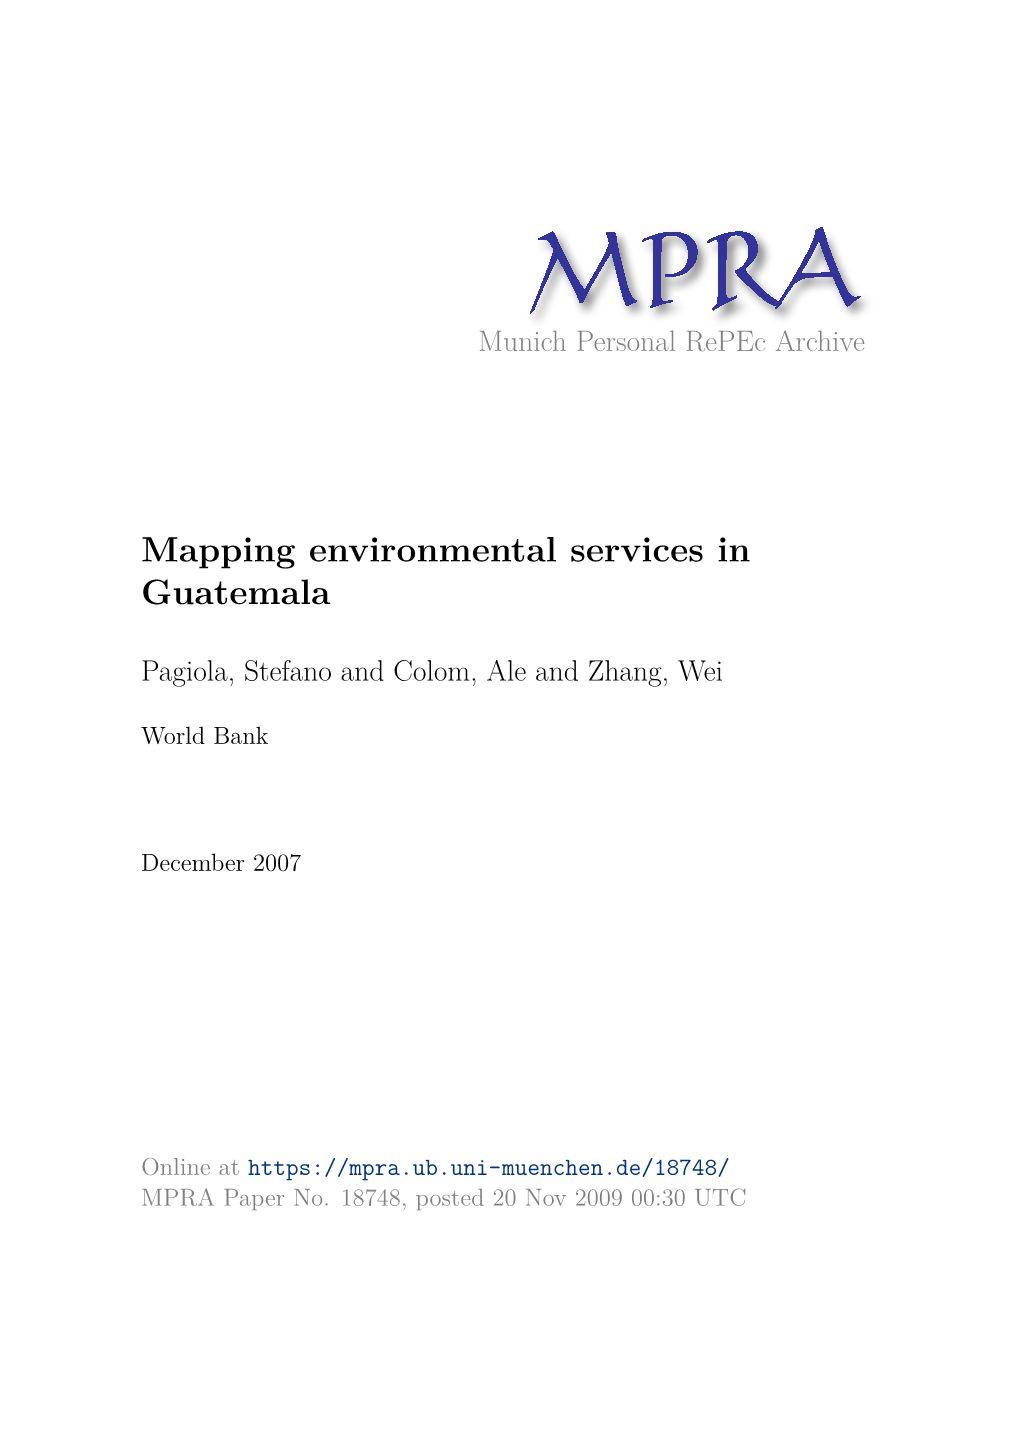 Mapping Environmental Services in Guatemala